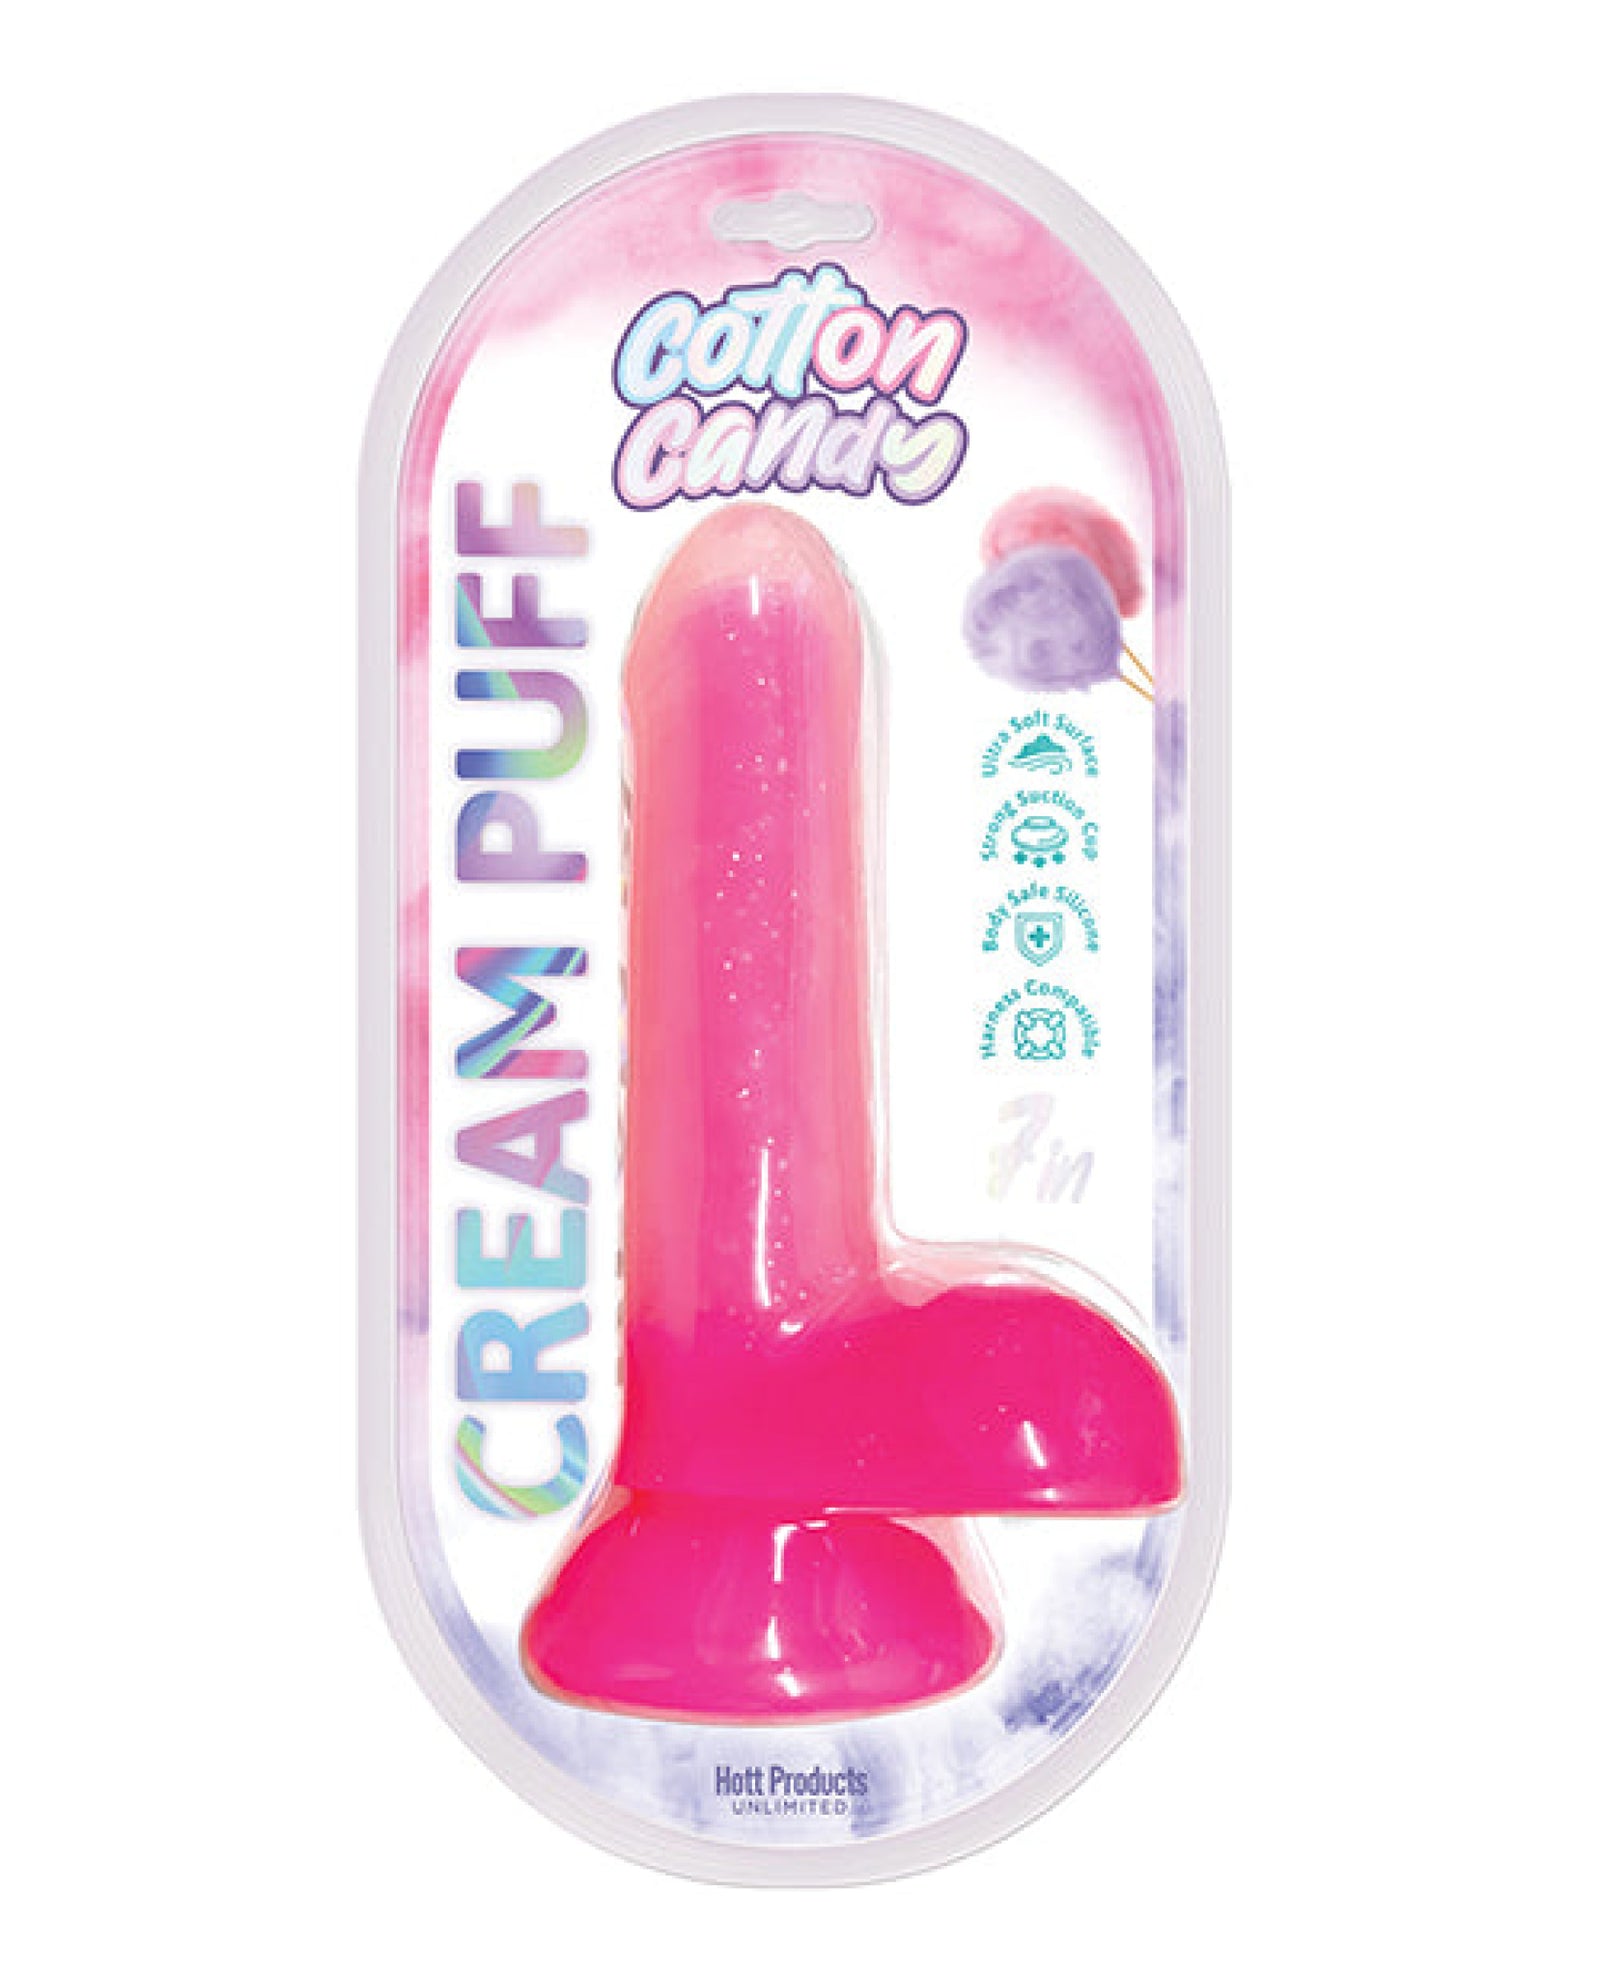 Cotton Candy Cream Puff 6" Dildo - Pink Hott Products